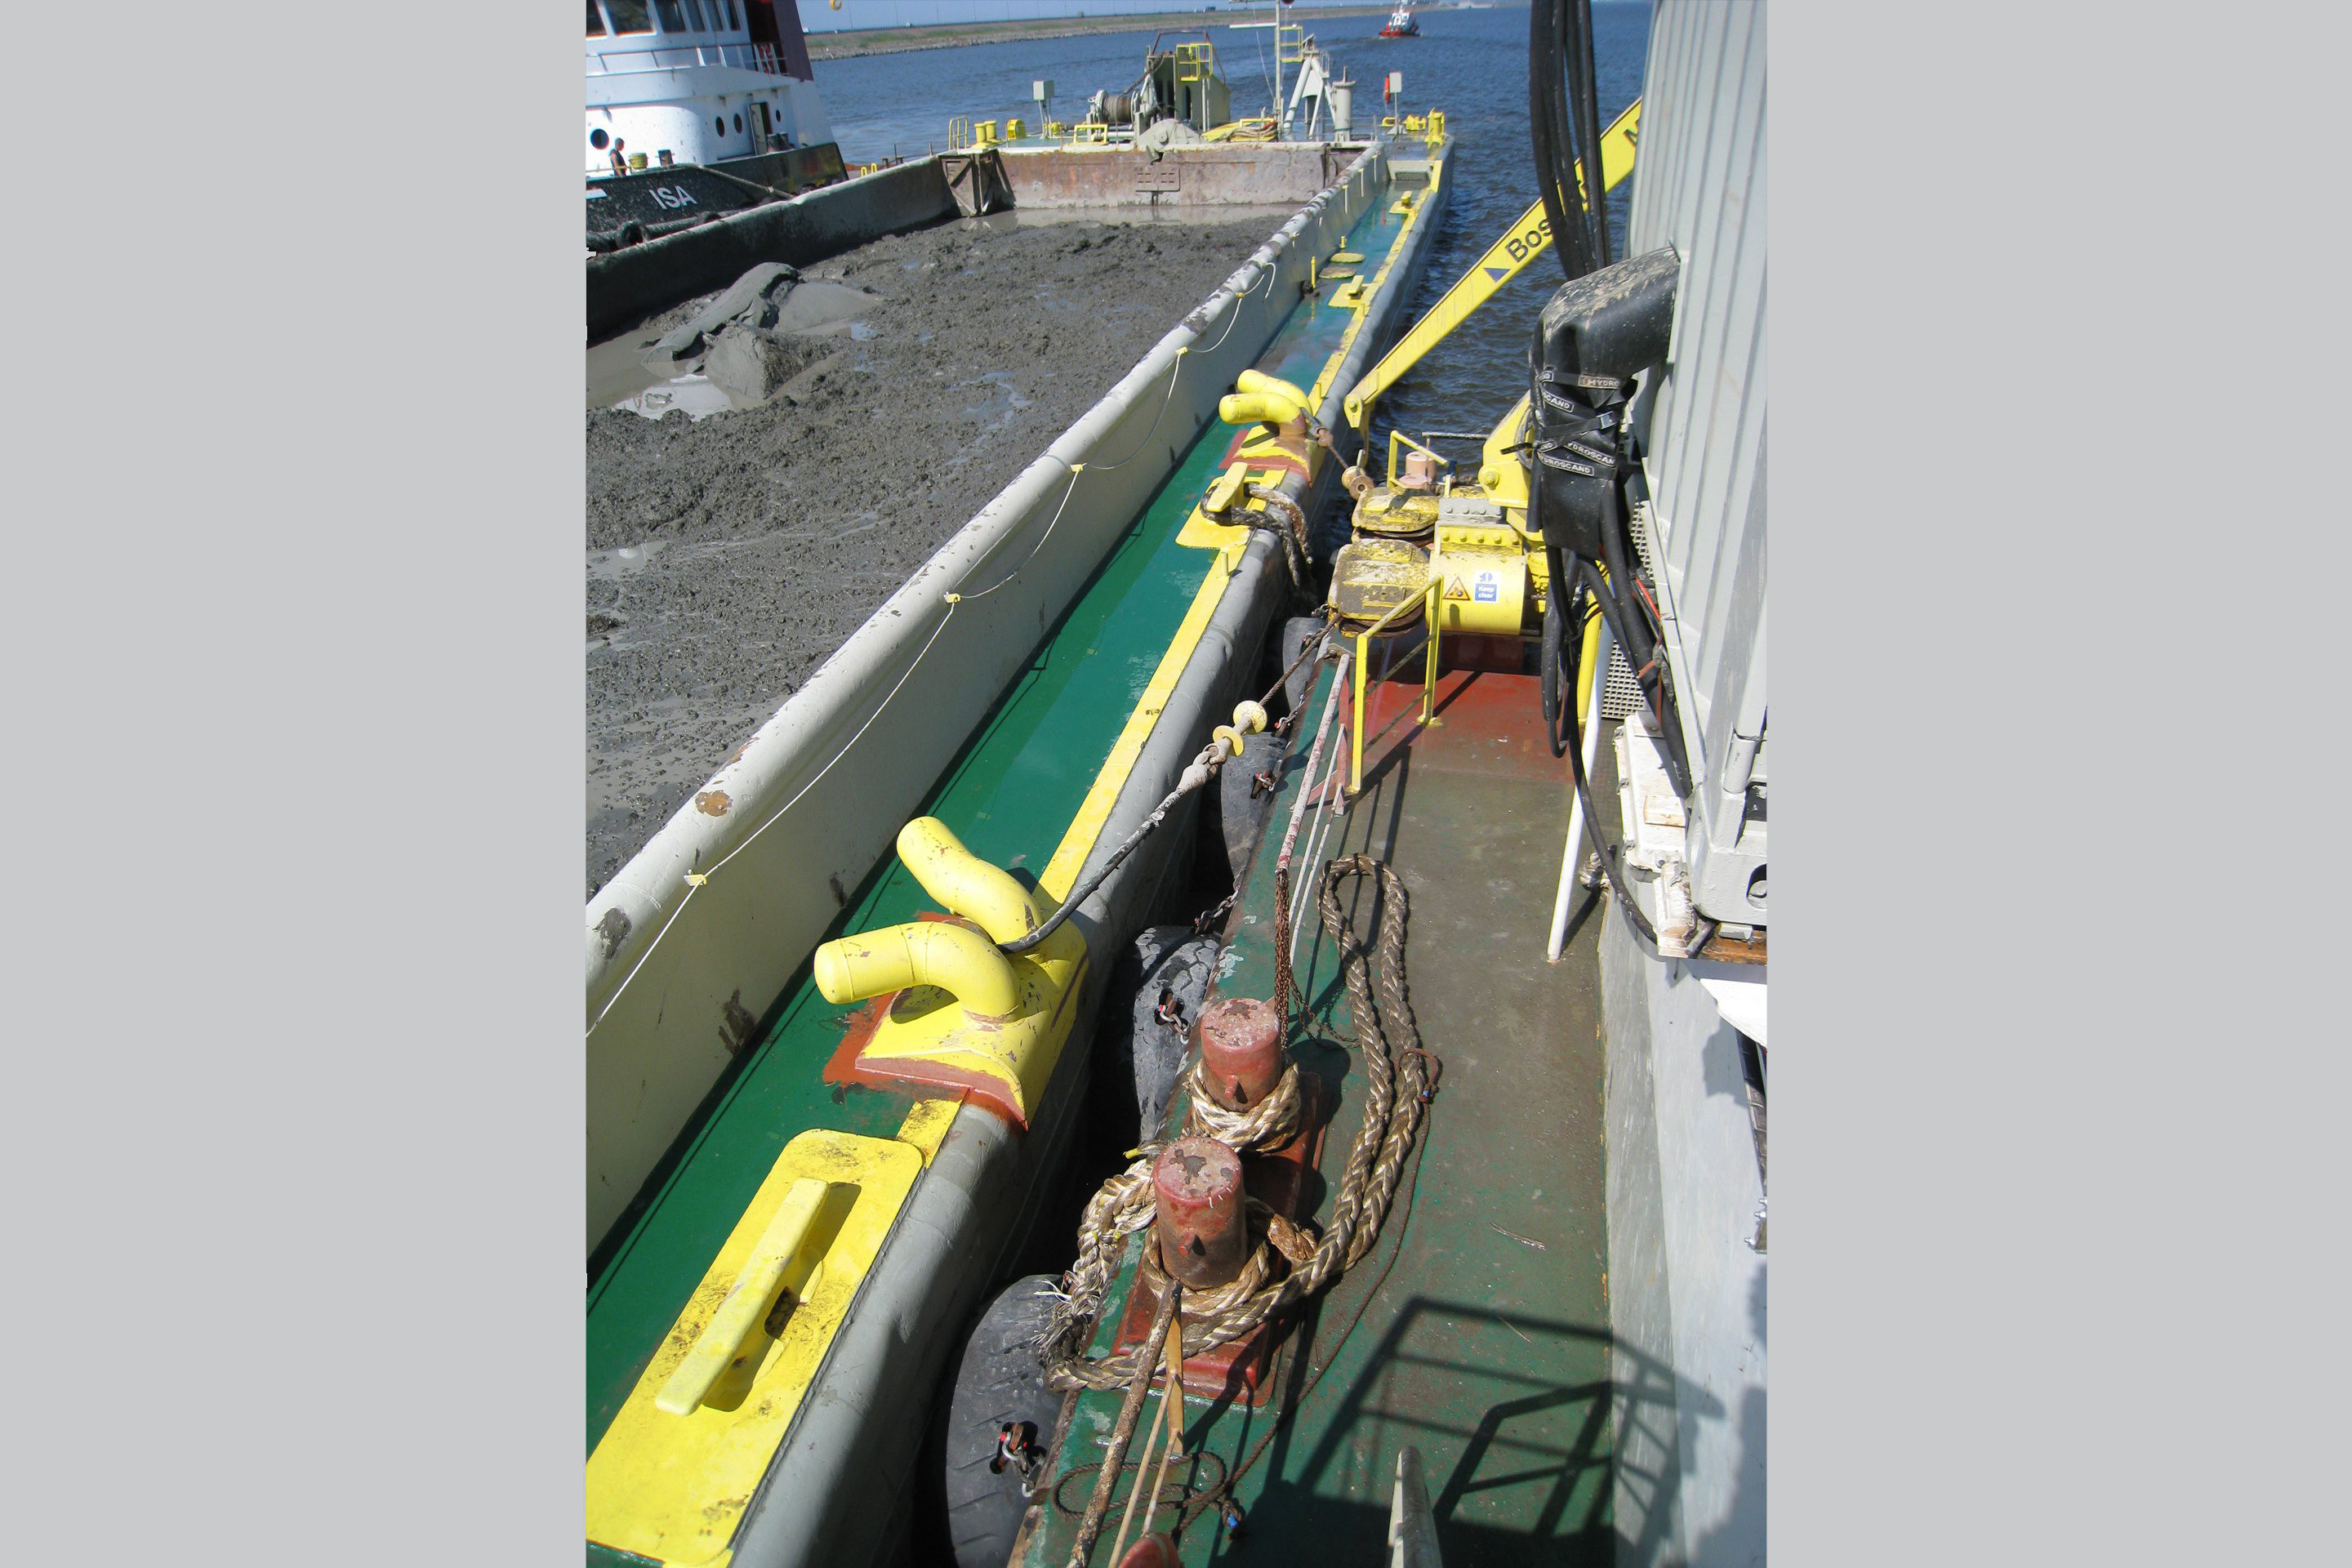 Specially developed constant tension (CT) winches roll up the line and pull the barge to the backhoe